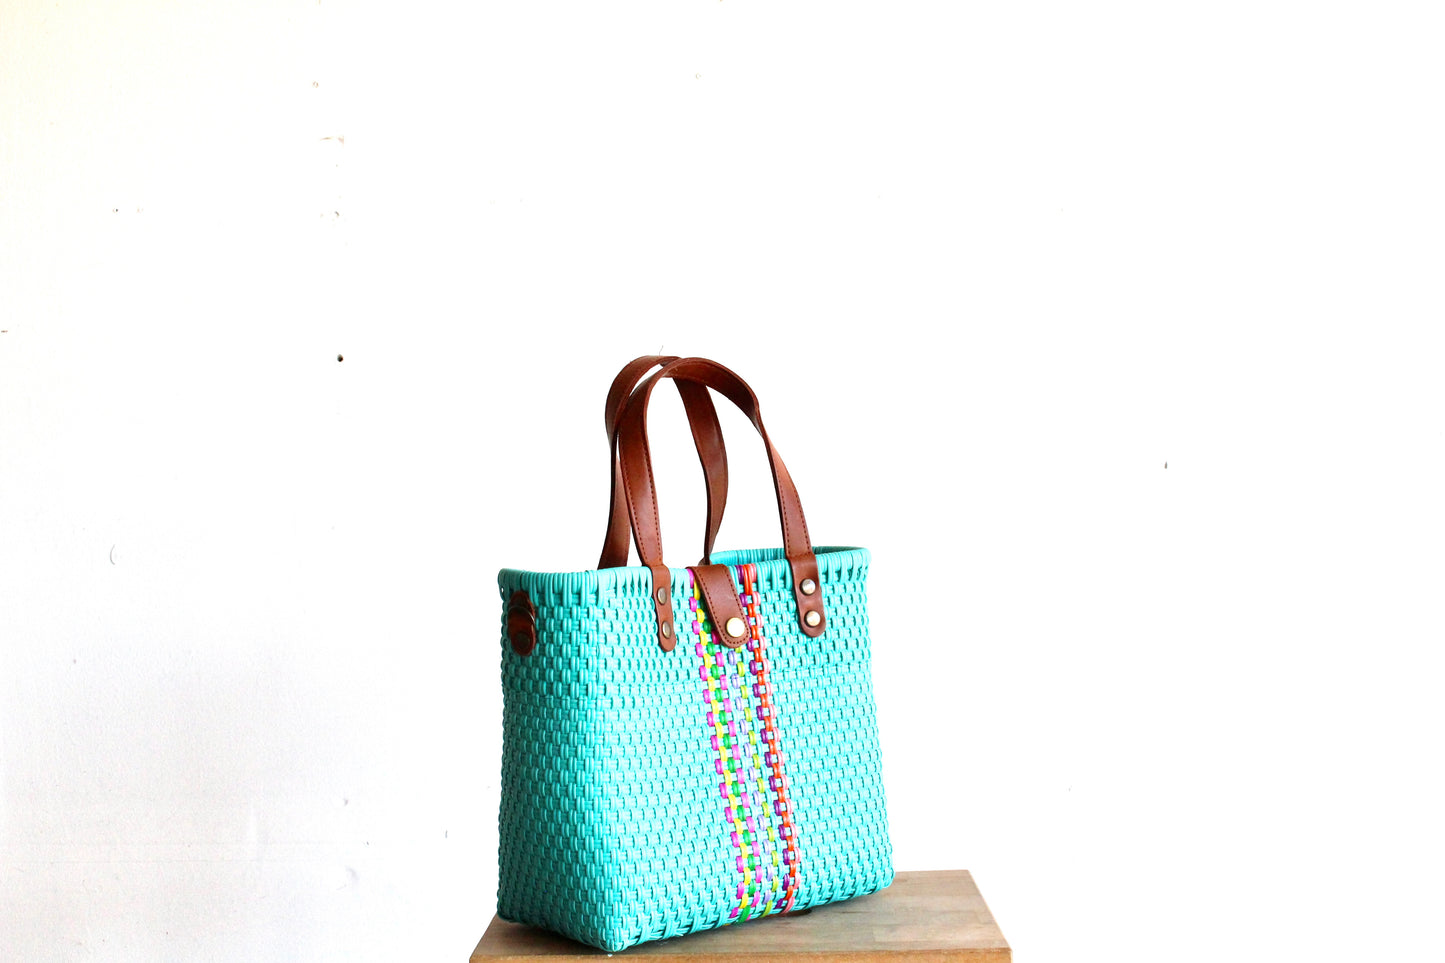 Teal & Colors Purse bag by MexiMexi